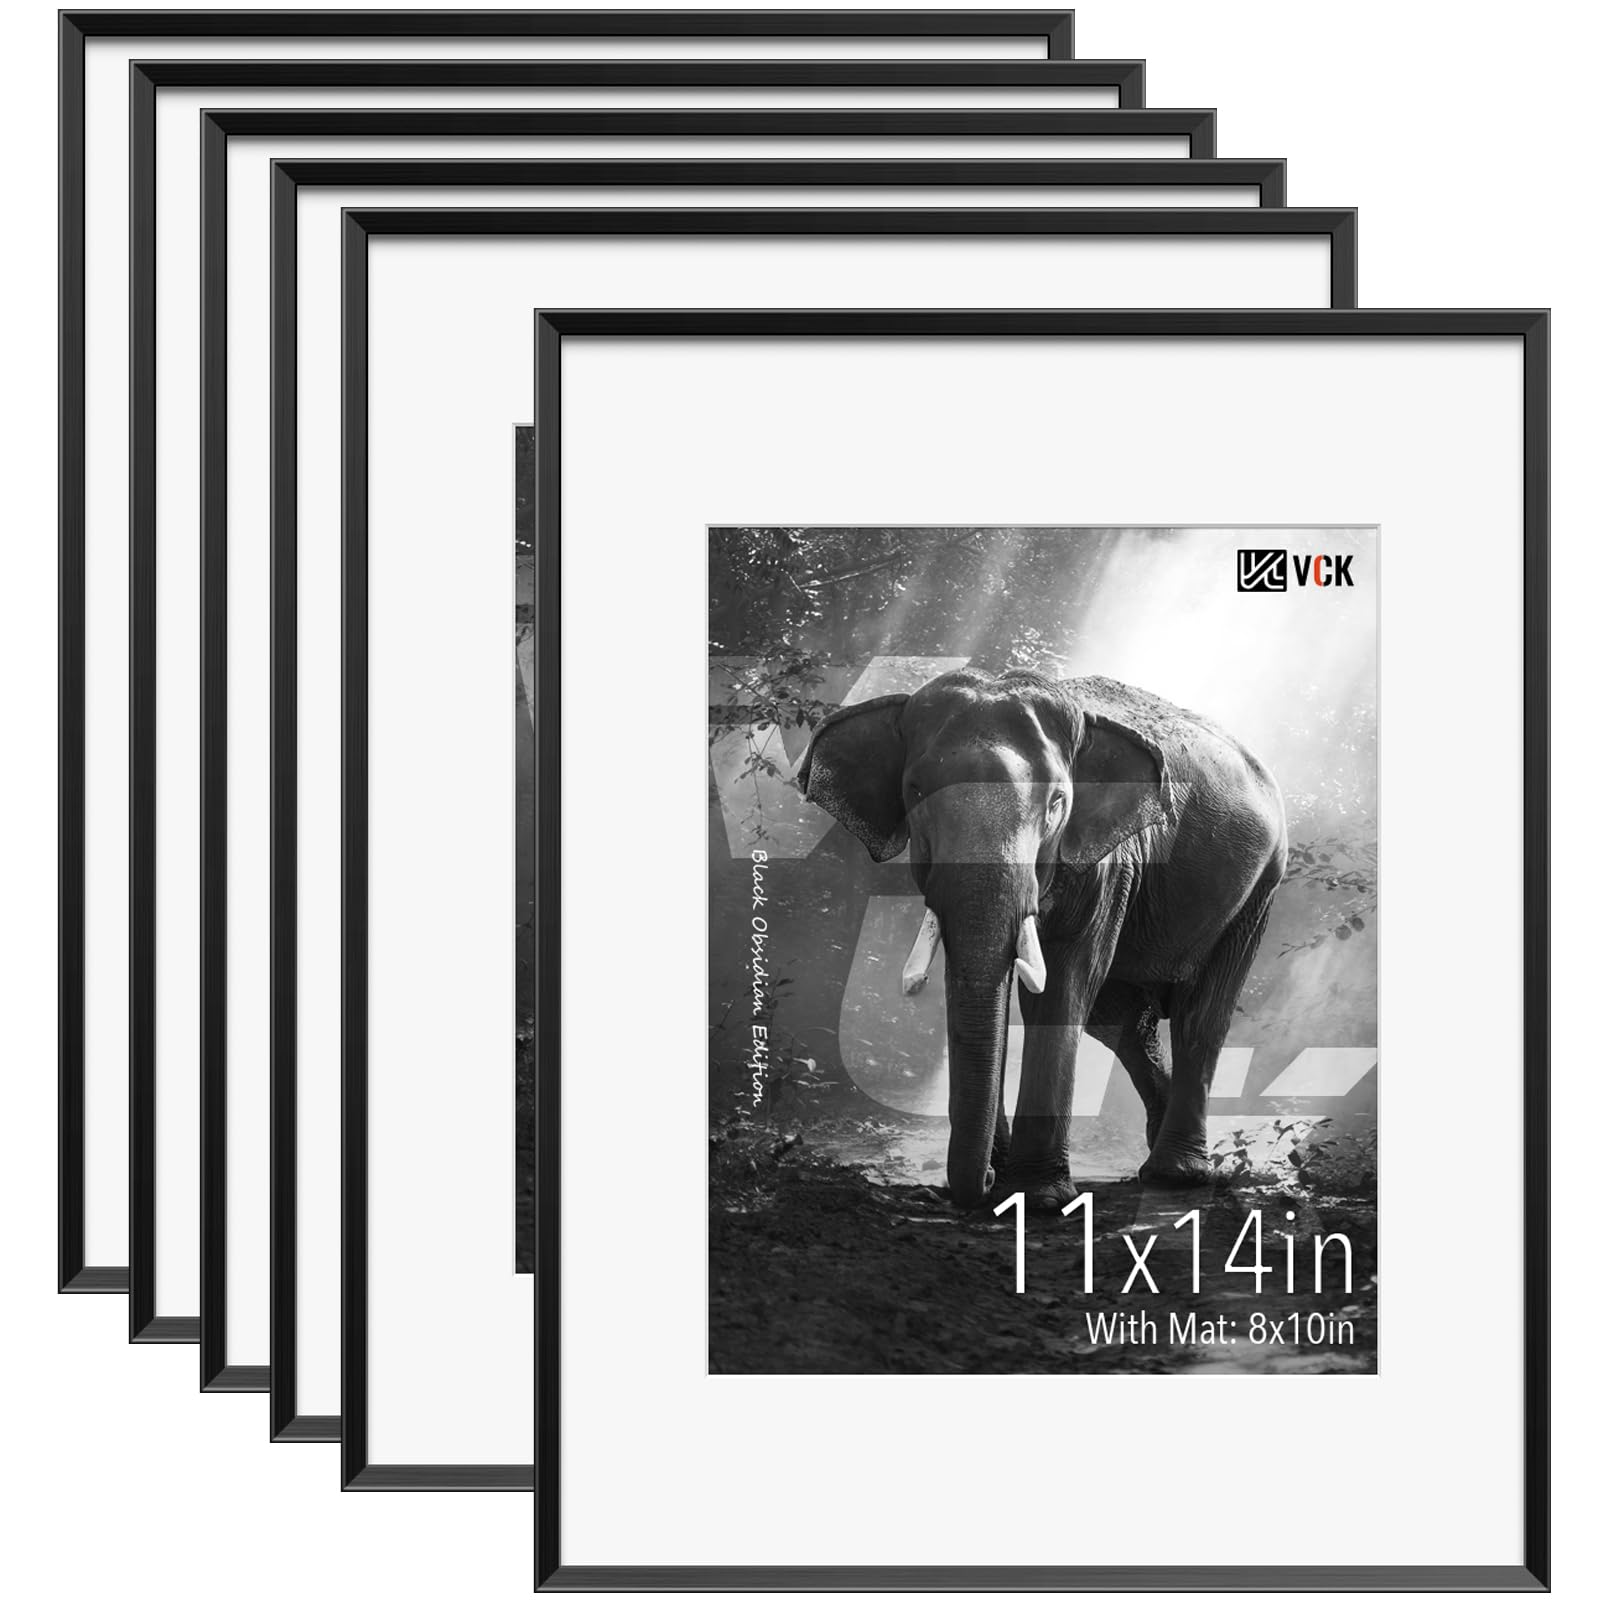 VCK Black 11x14 Aluminum Picture Frames Set of 6, Metal Photo Frame with Shatter-Resistant Real Glass, 11x14 Matted to 8x10 Phot